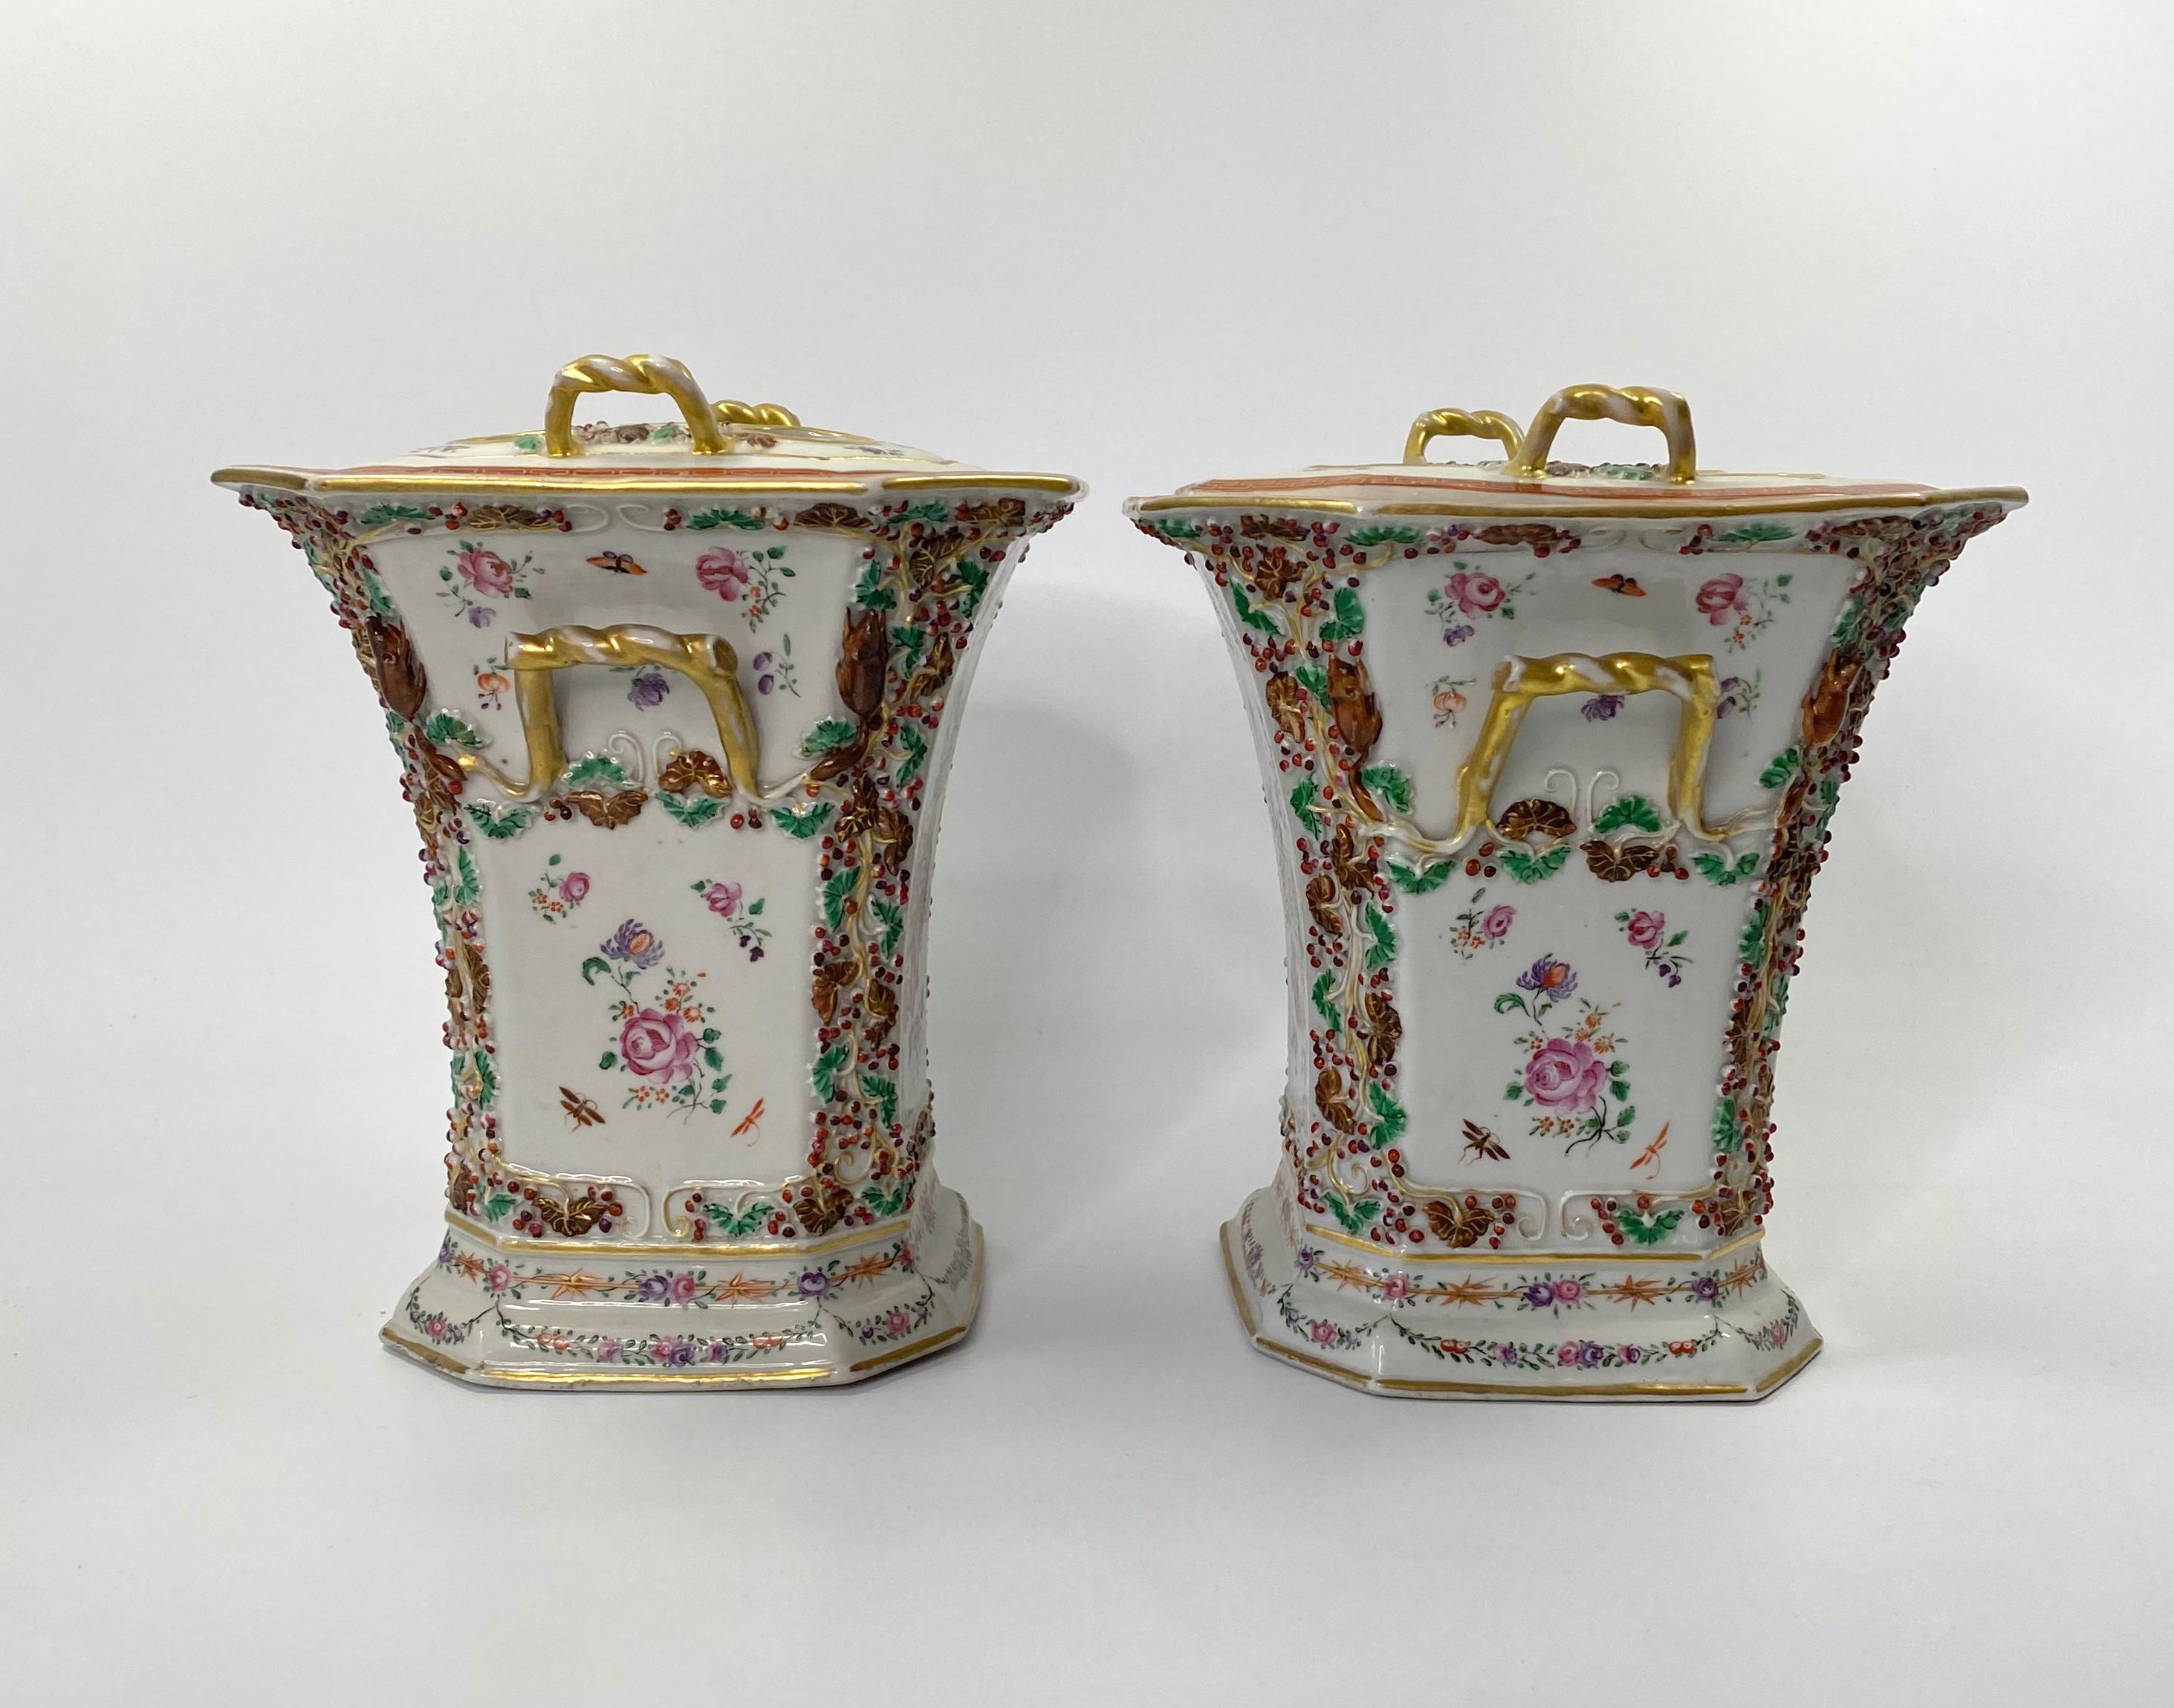 An exceptionally fine pair of Chinese porcelain bough pots and covers, Qianlong Period (1736 -1795). Hand painted in famille rose or fencai enamels, with panels of dishes of fruit upon stands, alongside vases of flowers, with insects flying above.